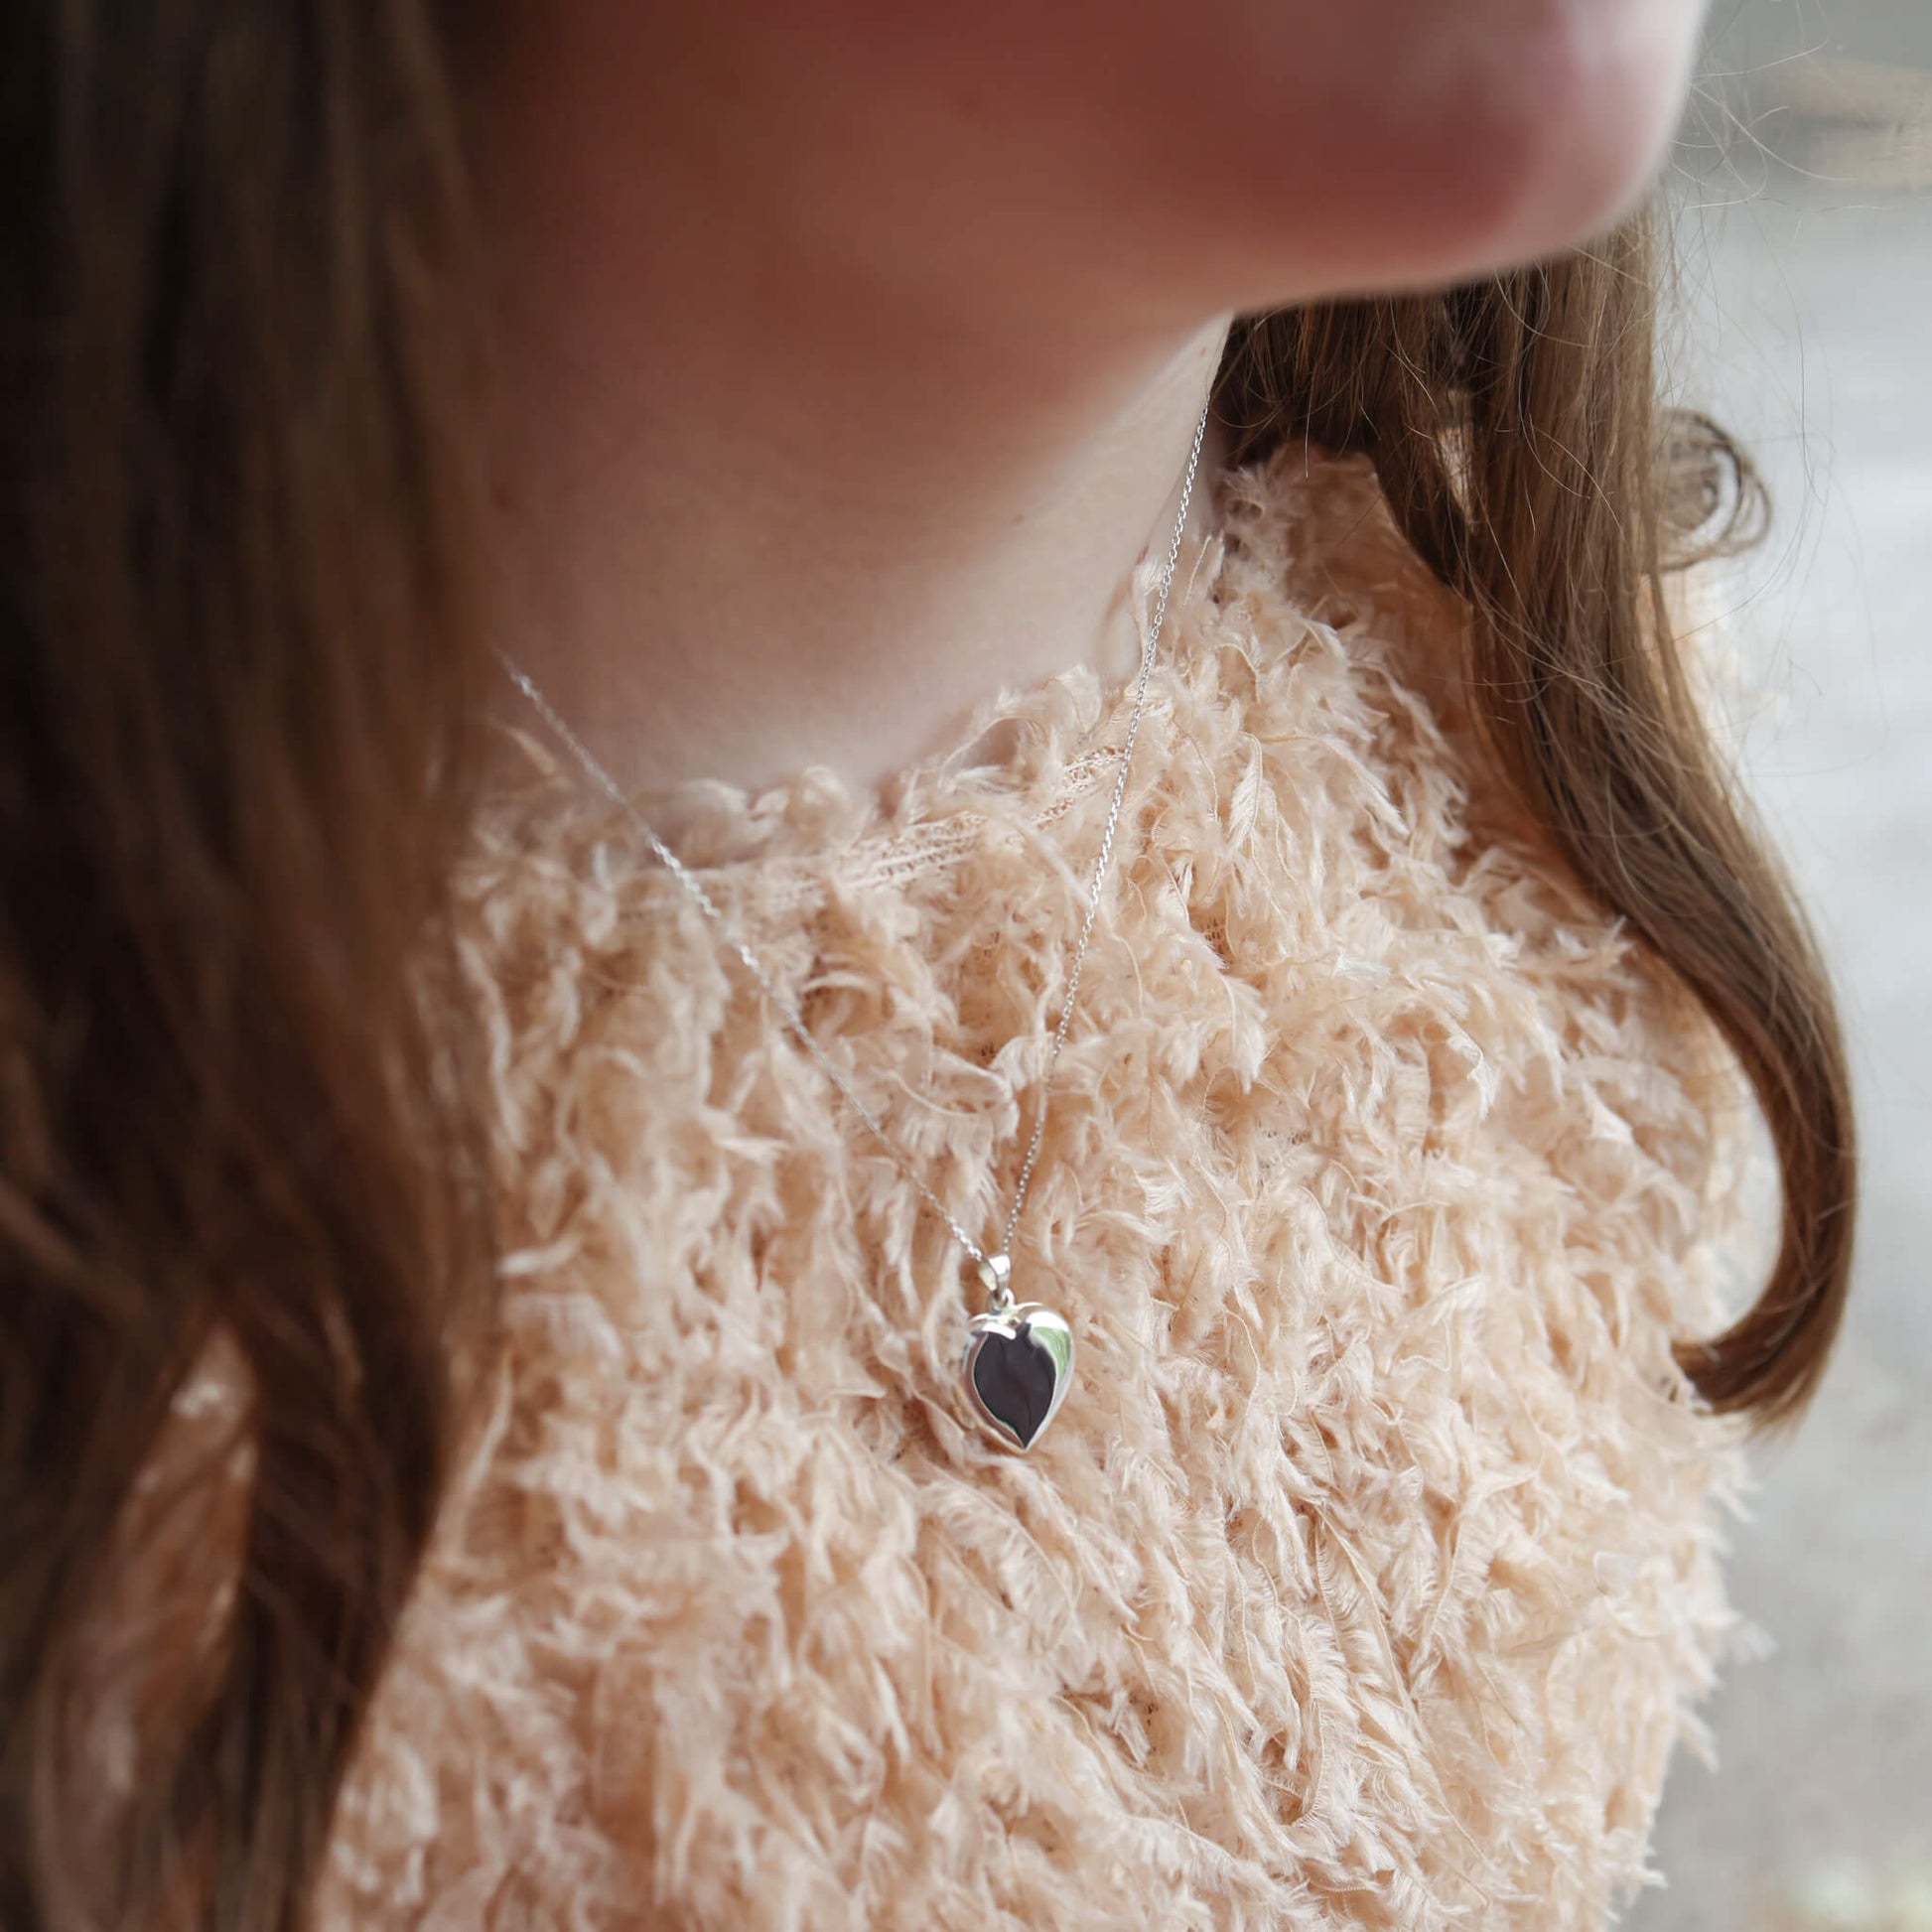 modern locket necklace worn by young model